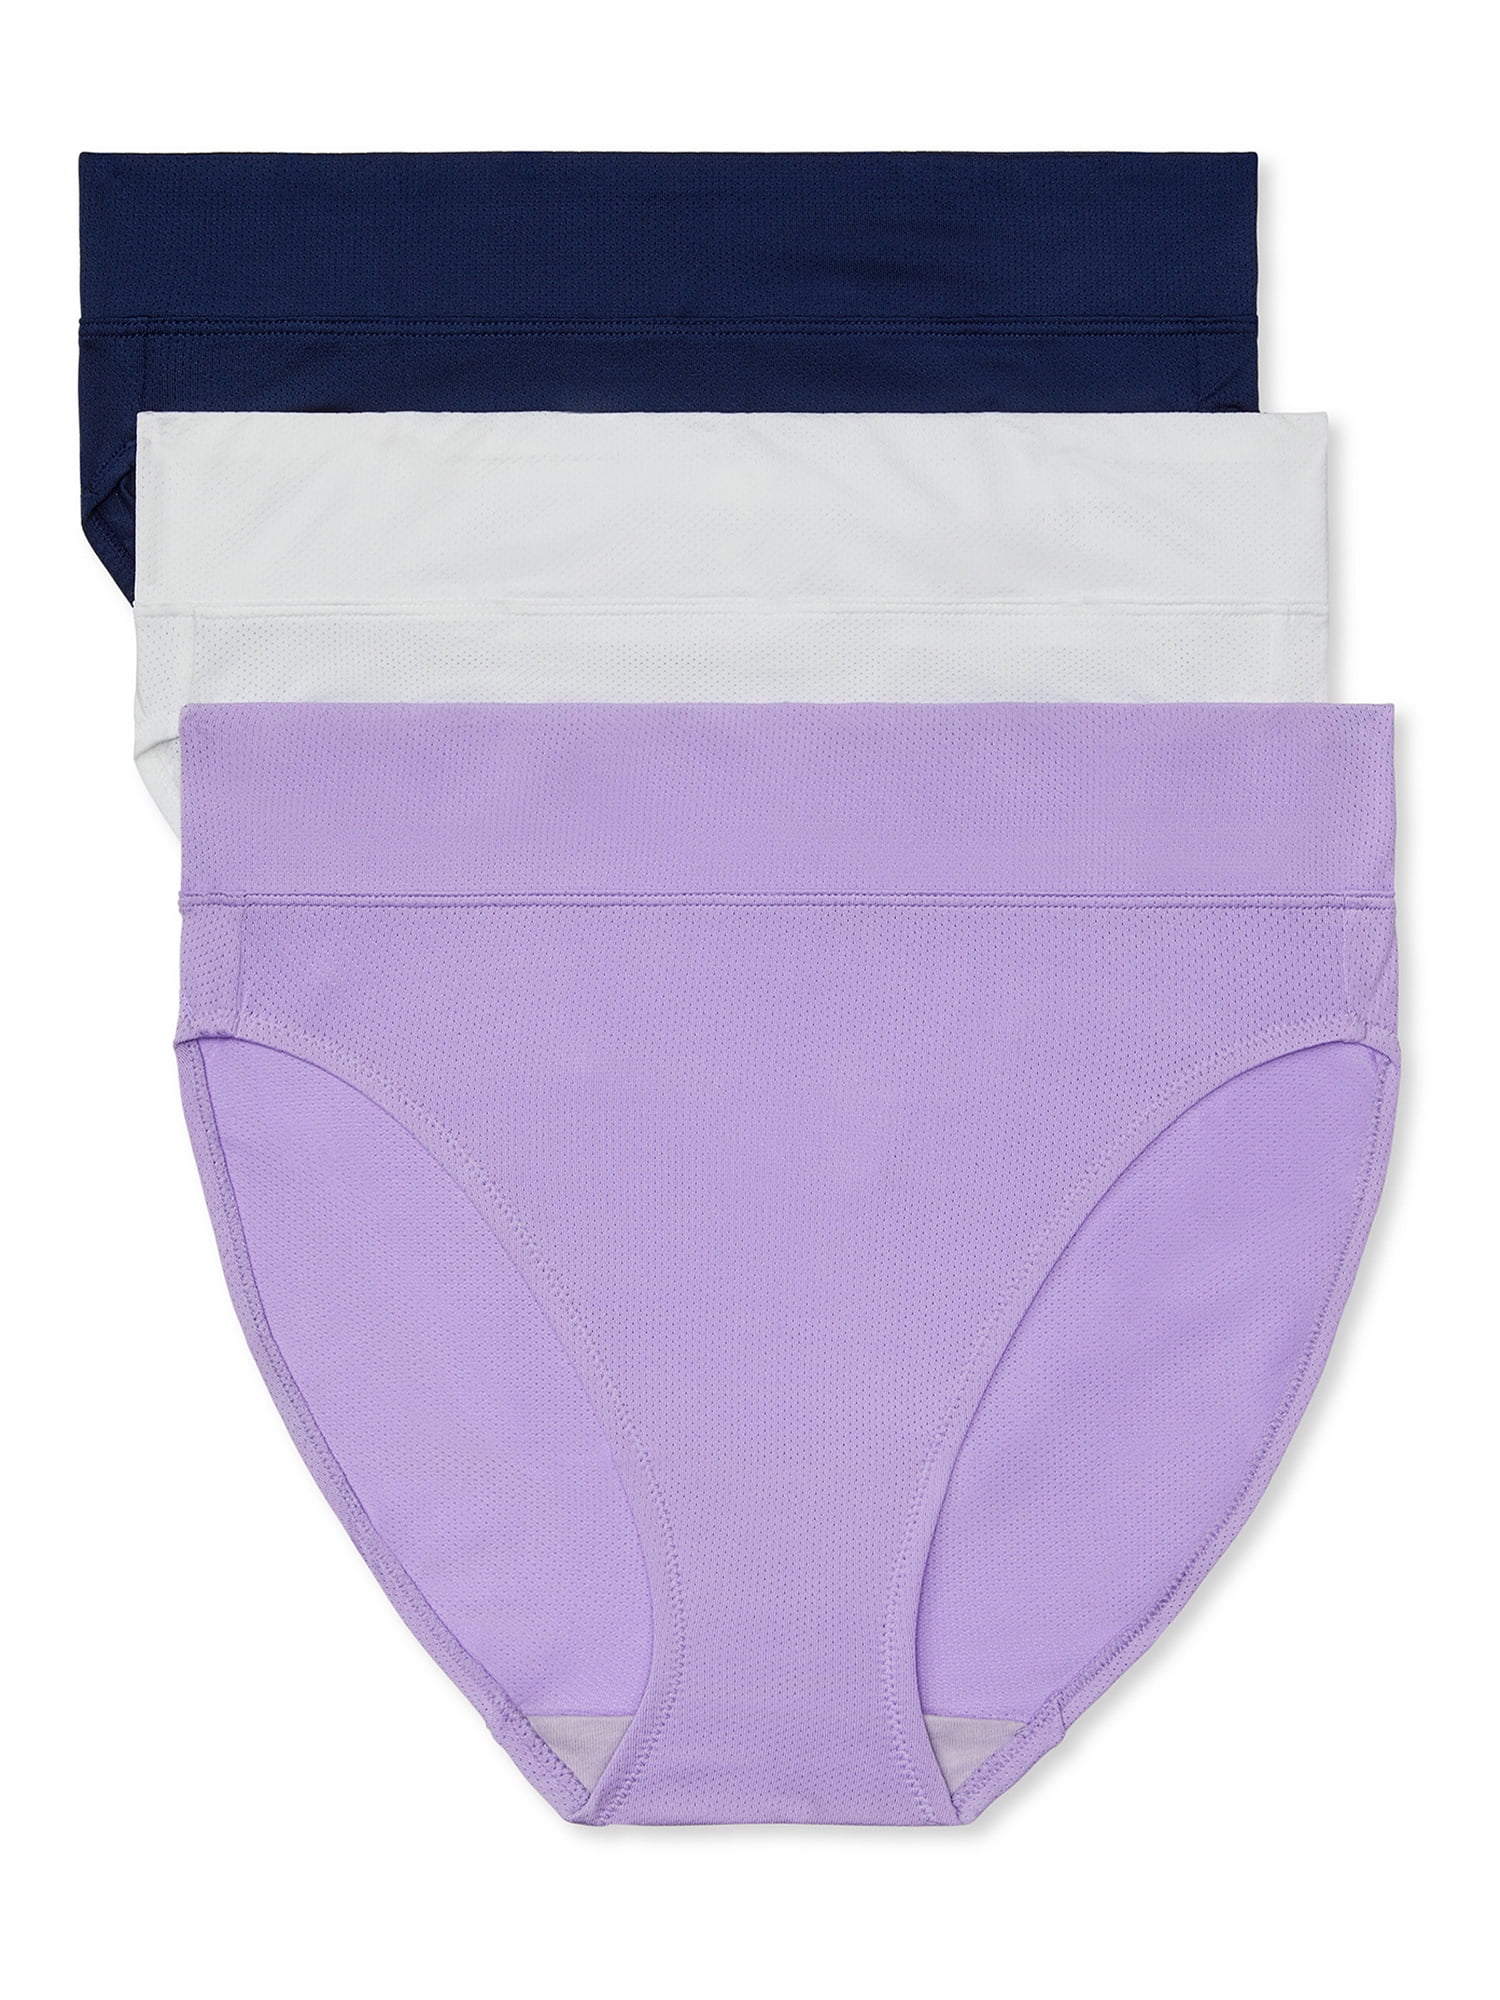 Warners Womens Allover Breathable Hi-Cut Panty 